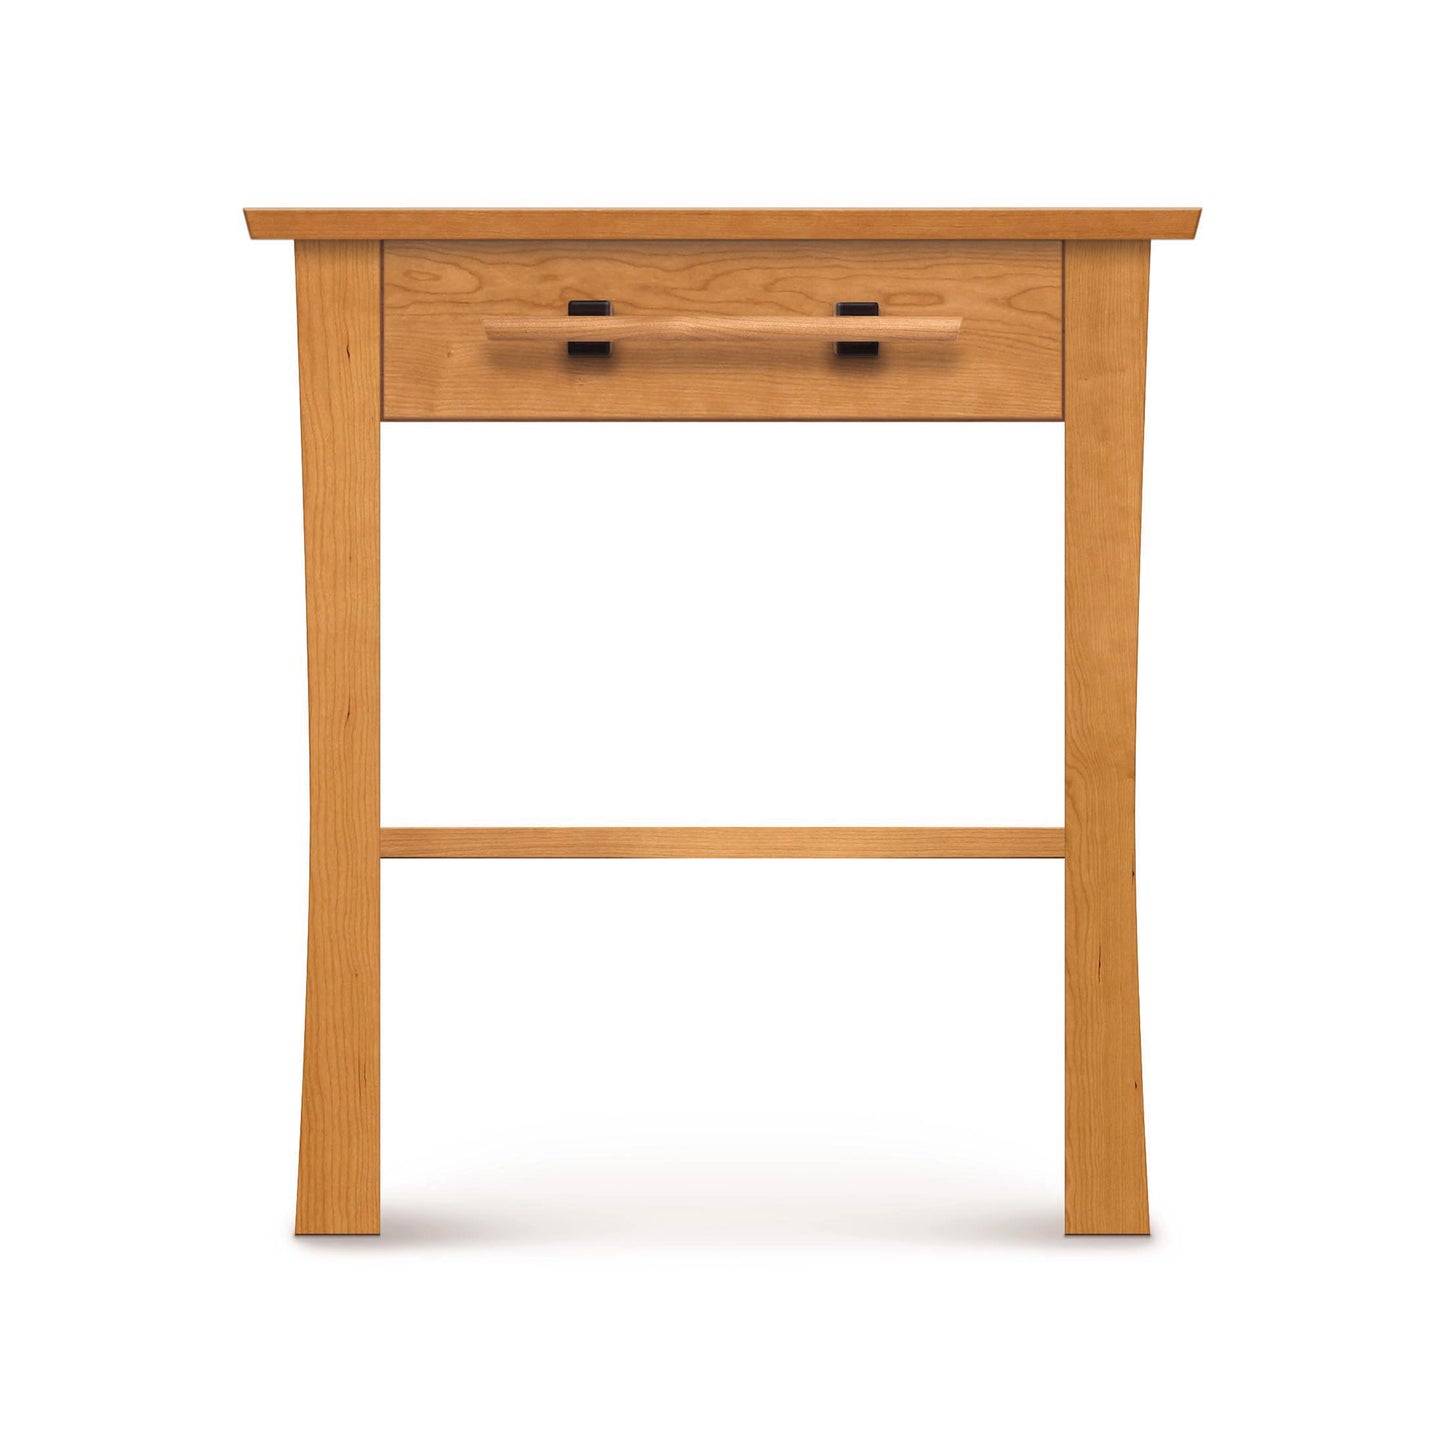 A Monterey 1-Drawer Nightstand from Copeland Furniture with a single drawer, placed against a white background.